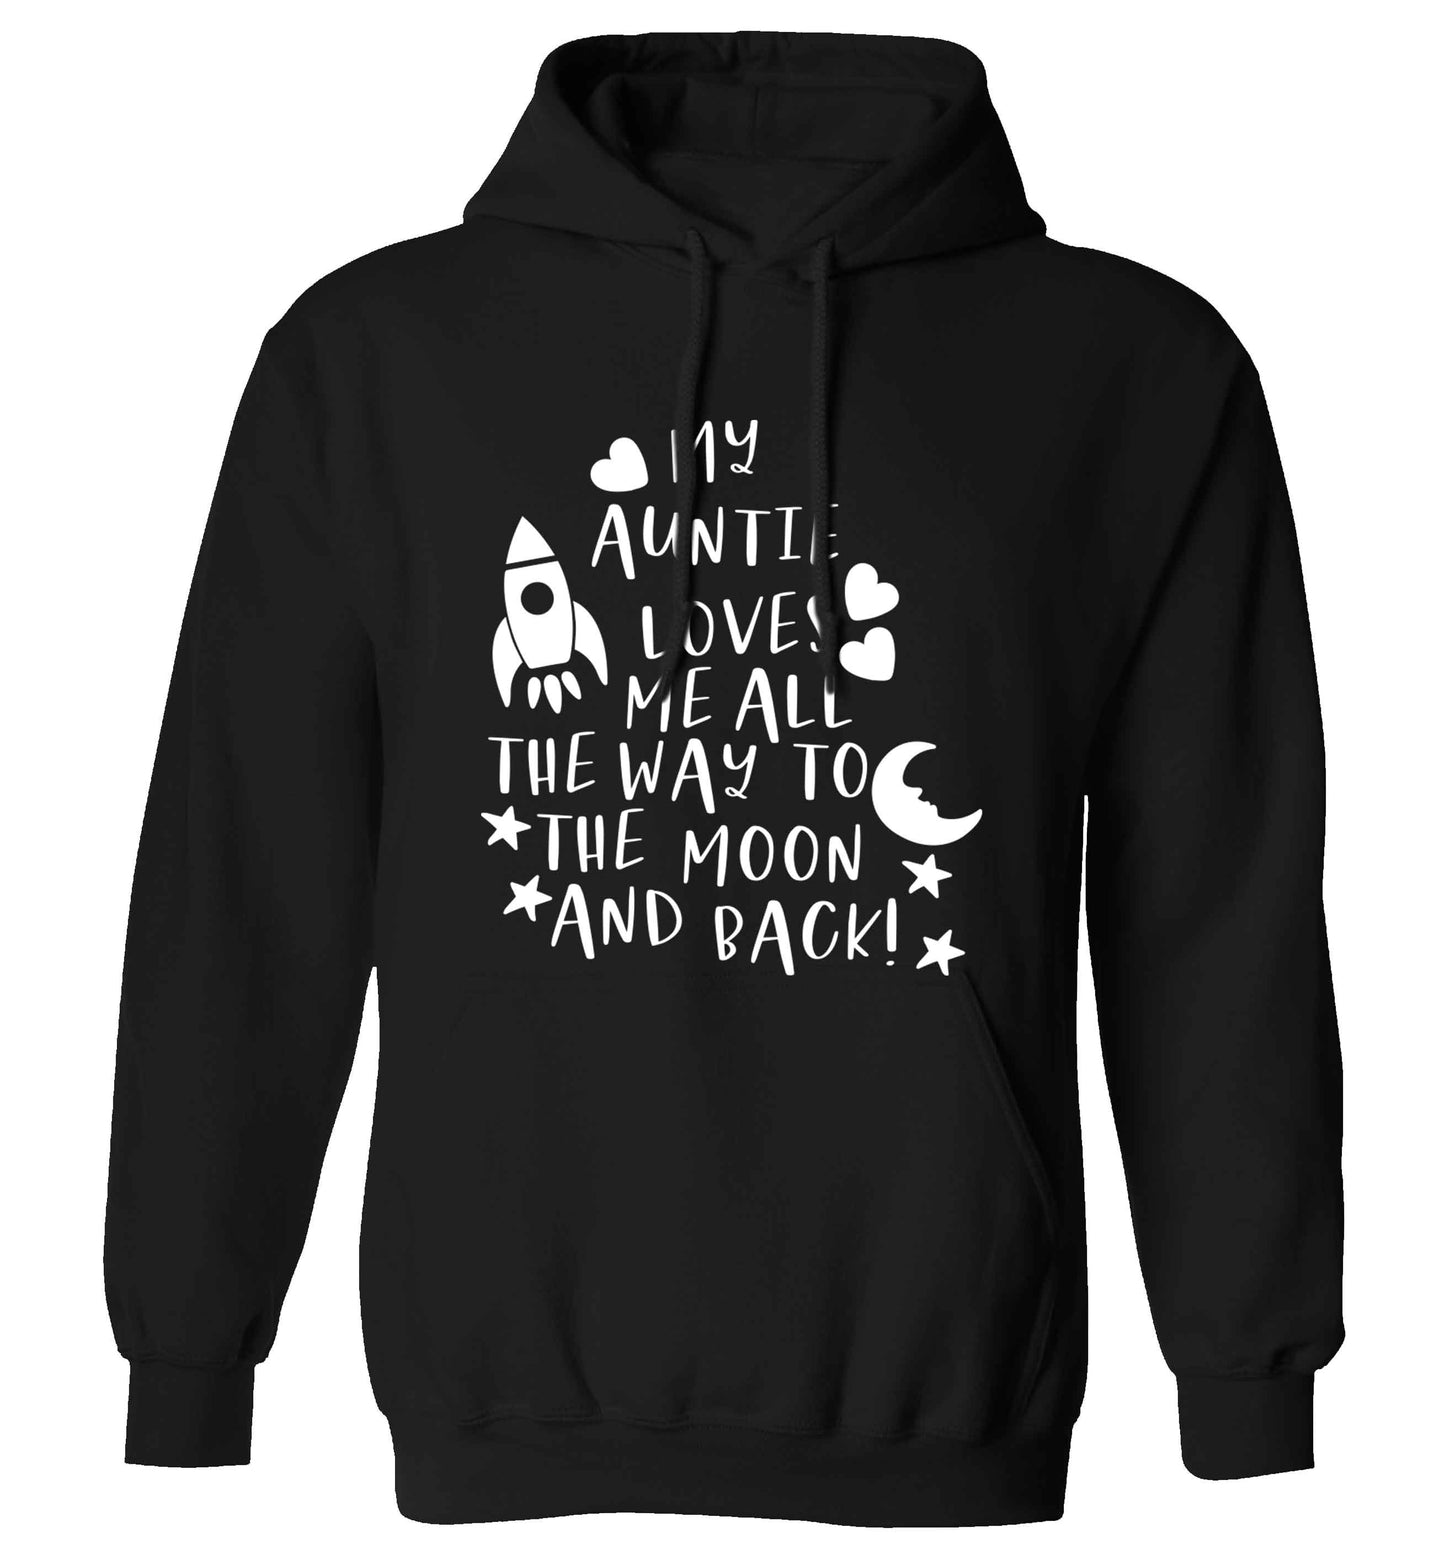 My auntie loves me all the way to the moon and back adults unisex black hoodie 2XL